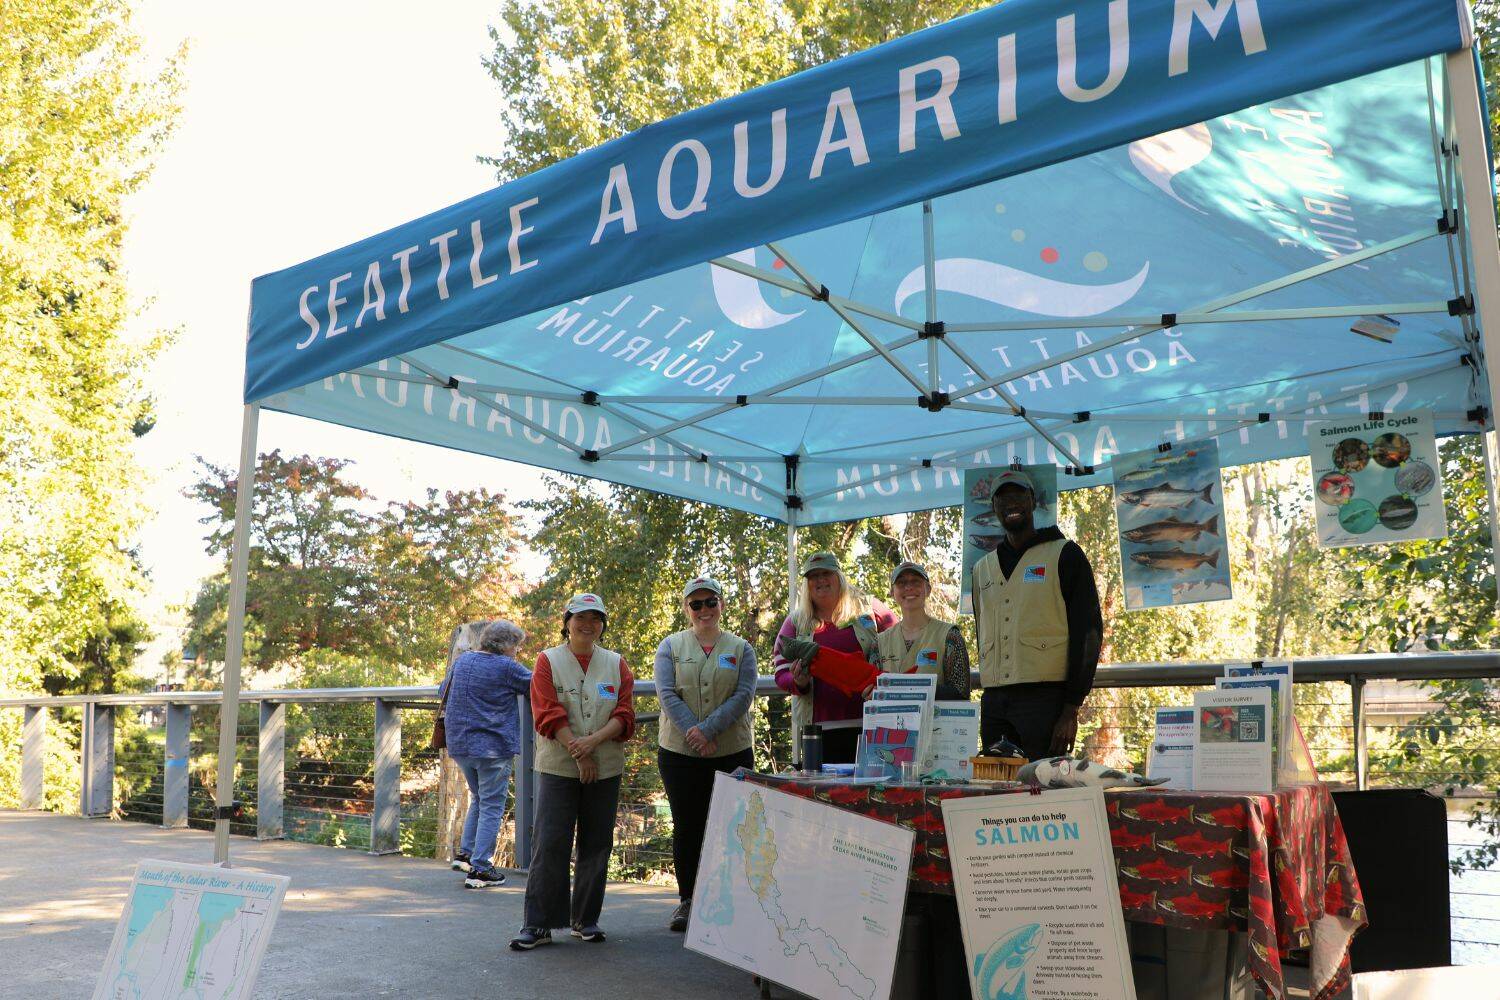 Cameron Sheppard/Sound Publishing
Volunteers from the Seattle Aquarium posted at the Renton Library to help teach people about the returning Cedar River salmon.